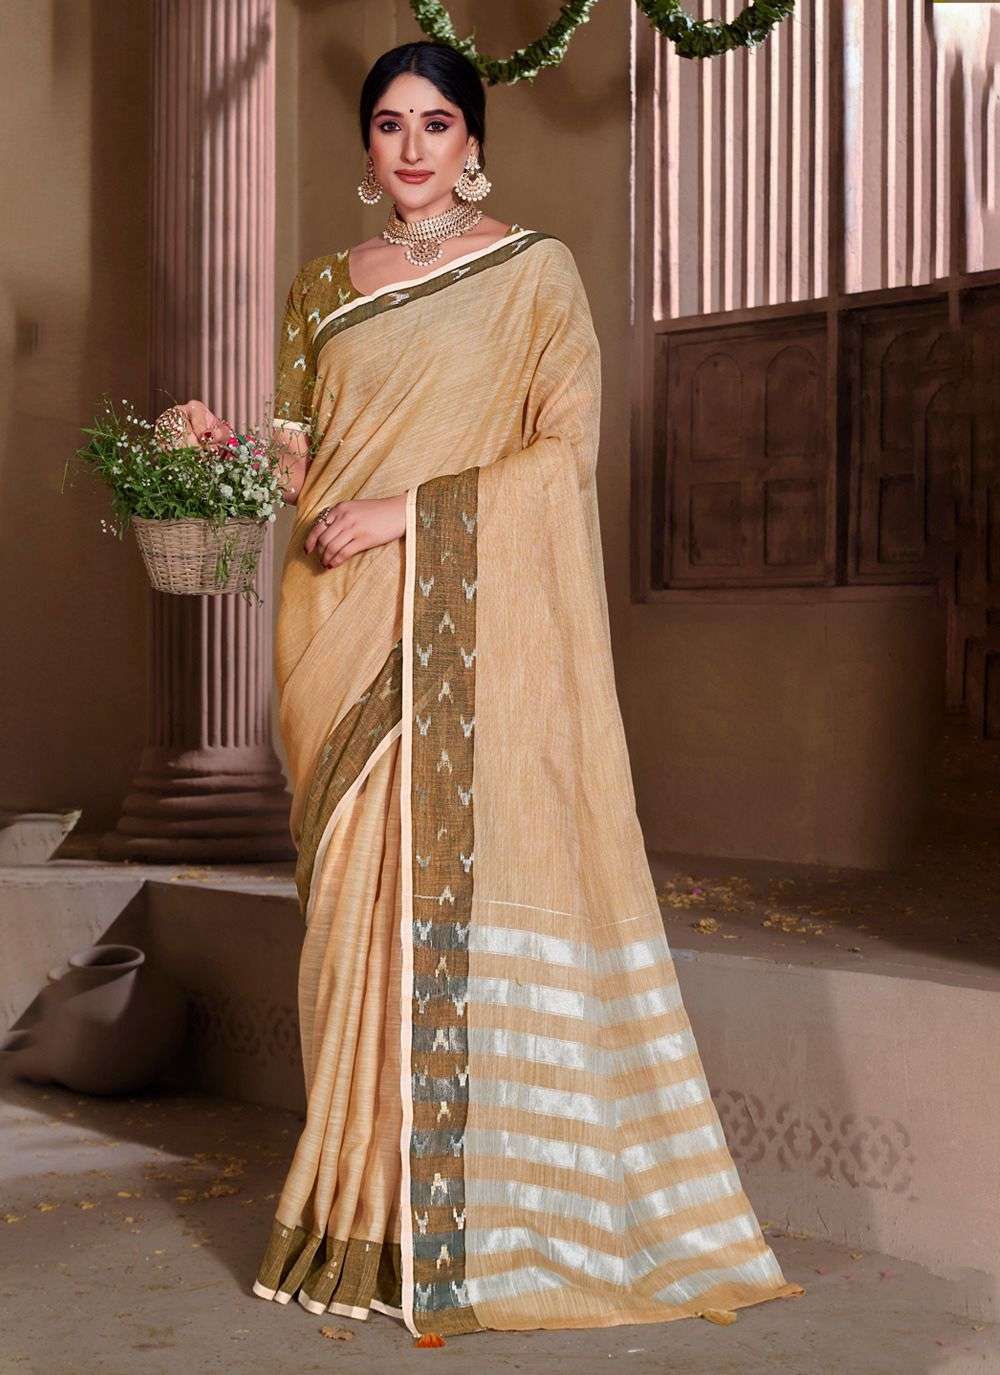 Sangam Aarushi Vol 2 Fancy Linene Festive Collection Saree Suppliers